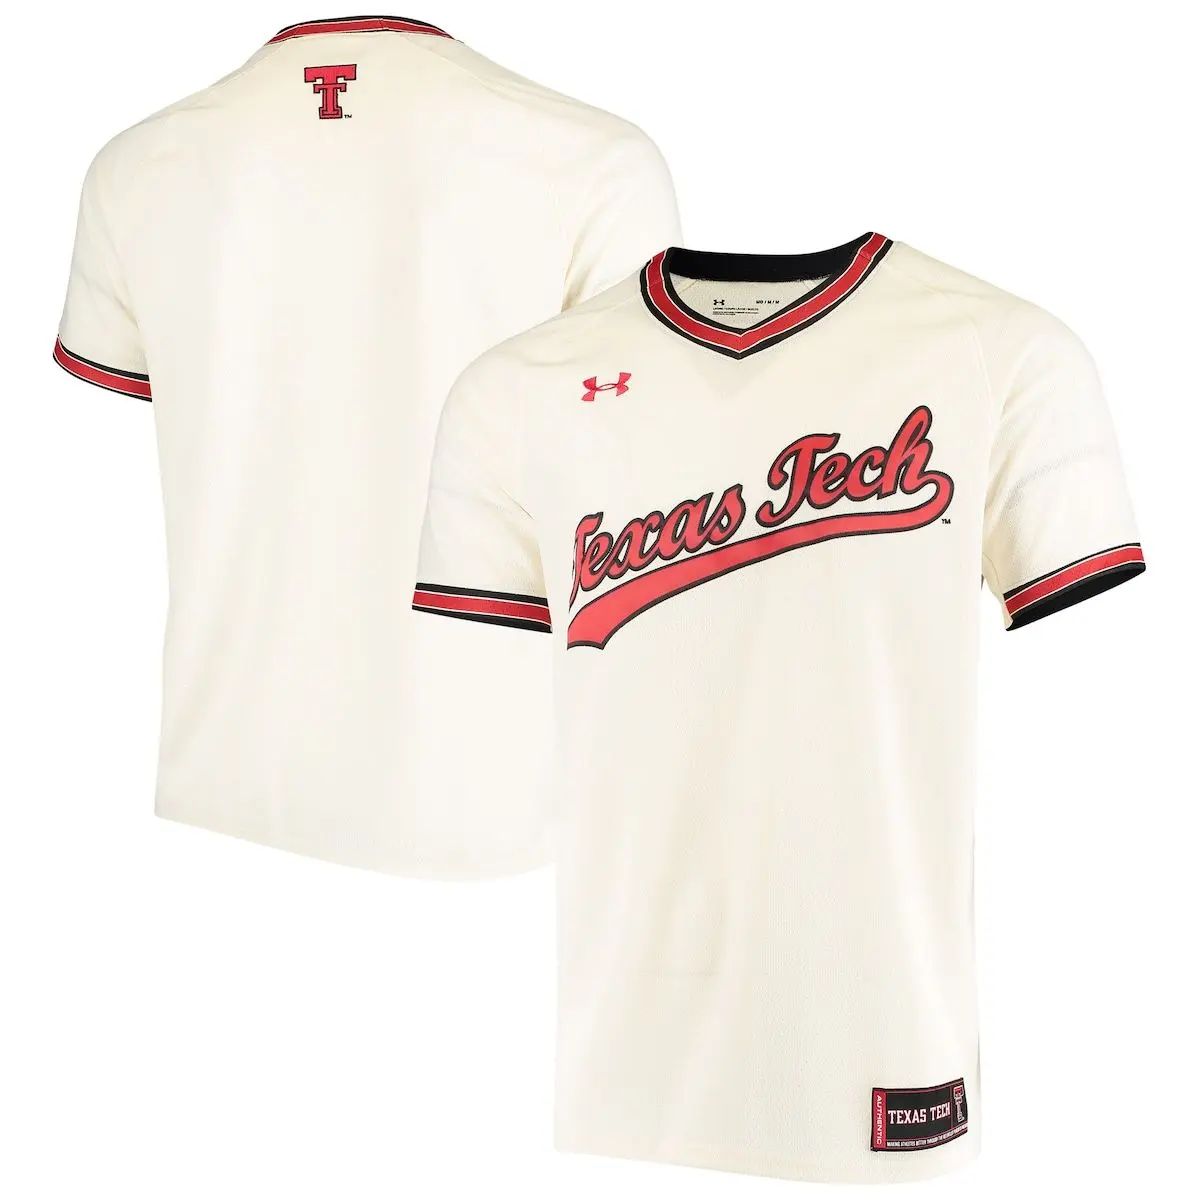 Men's Under Armour Cream Texas Tech Red Raiders Throwback Replica Baseball Jersey at Nordstrom, Size | Nordstrom